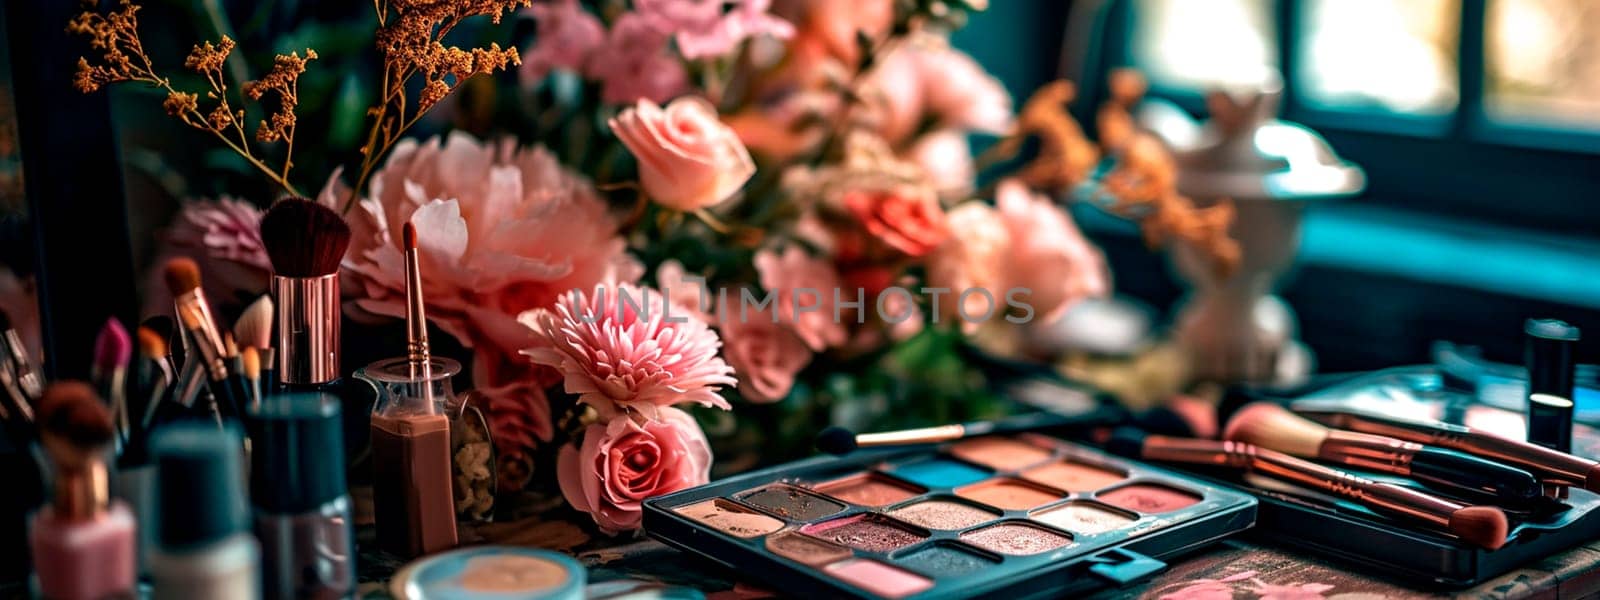 Decorative cosmetics for makeup, brush in hands and flowers. Selective focus. by yanadjana